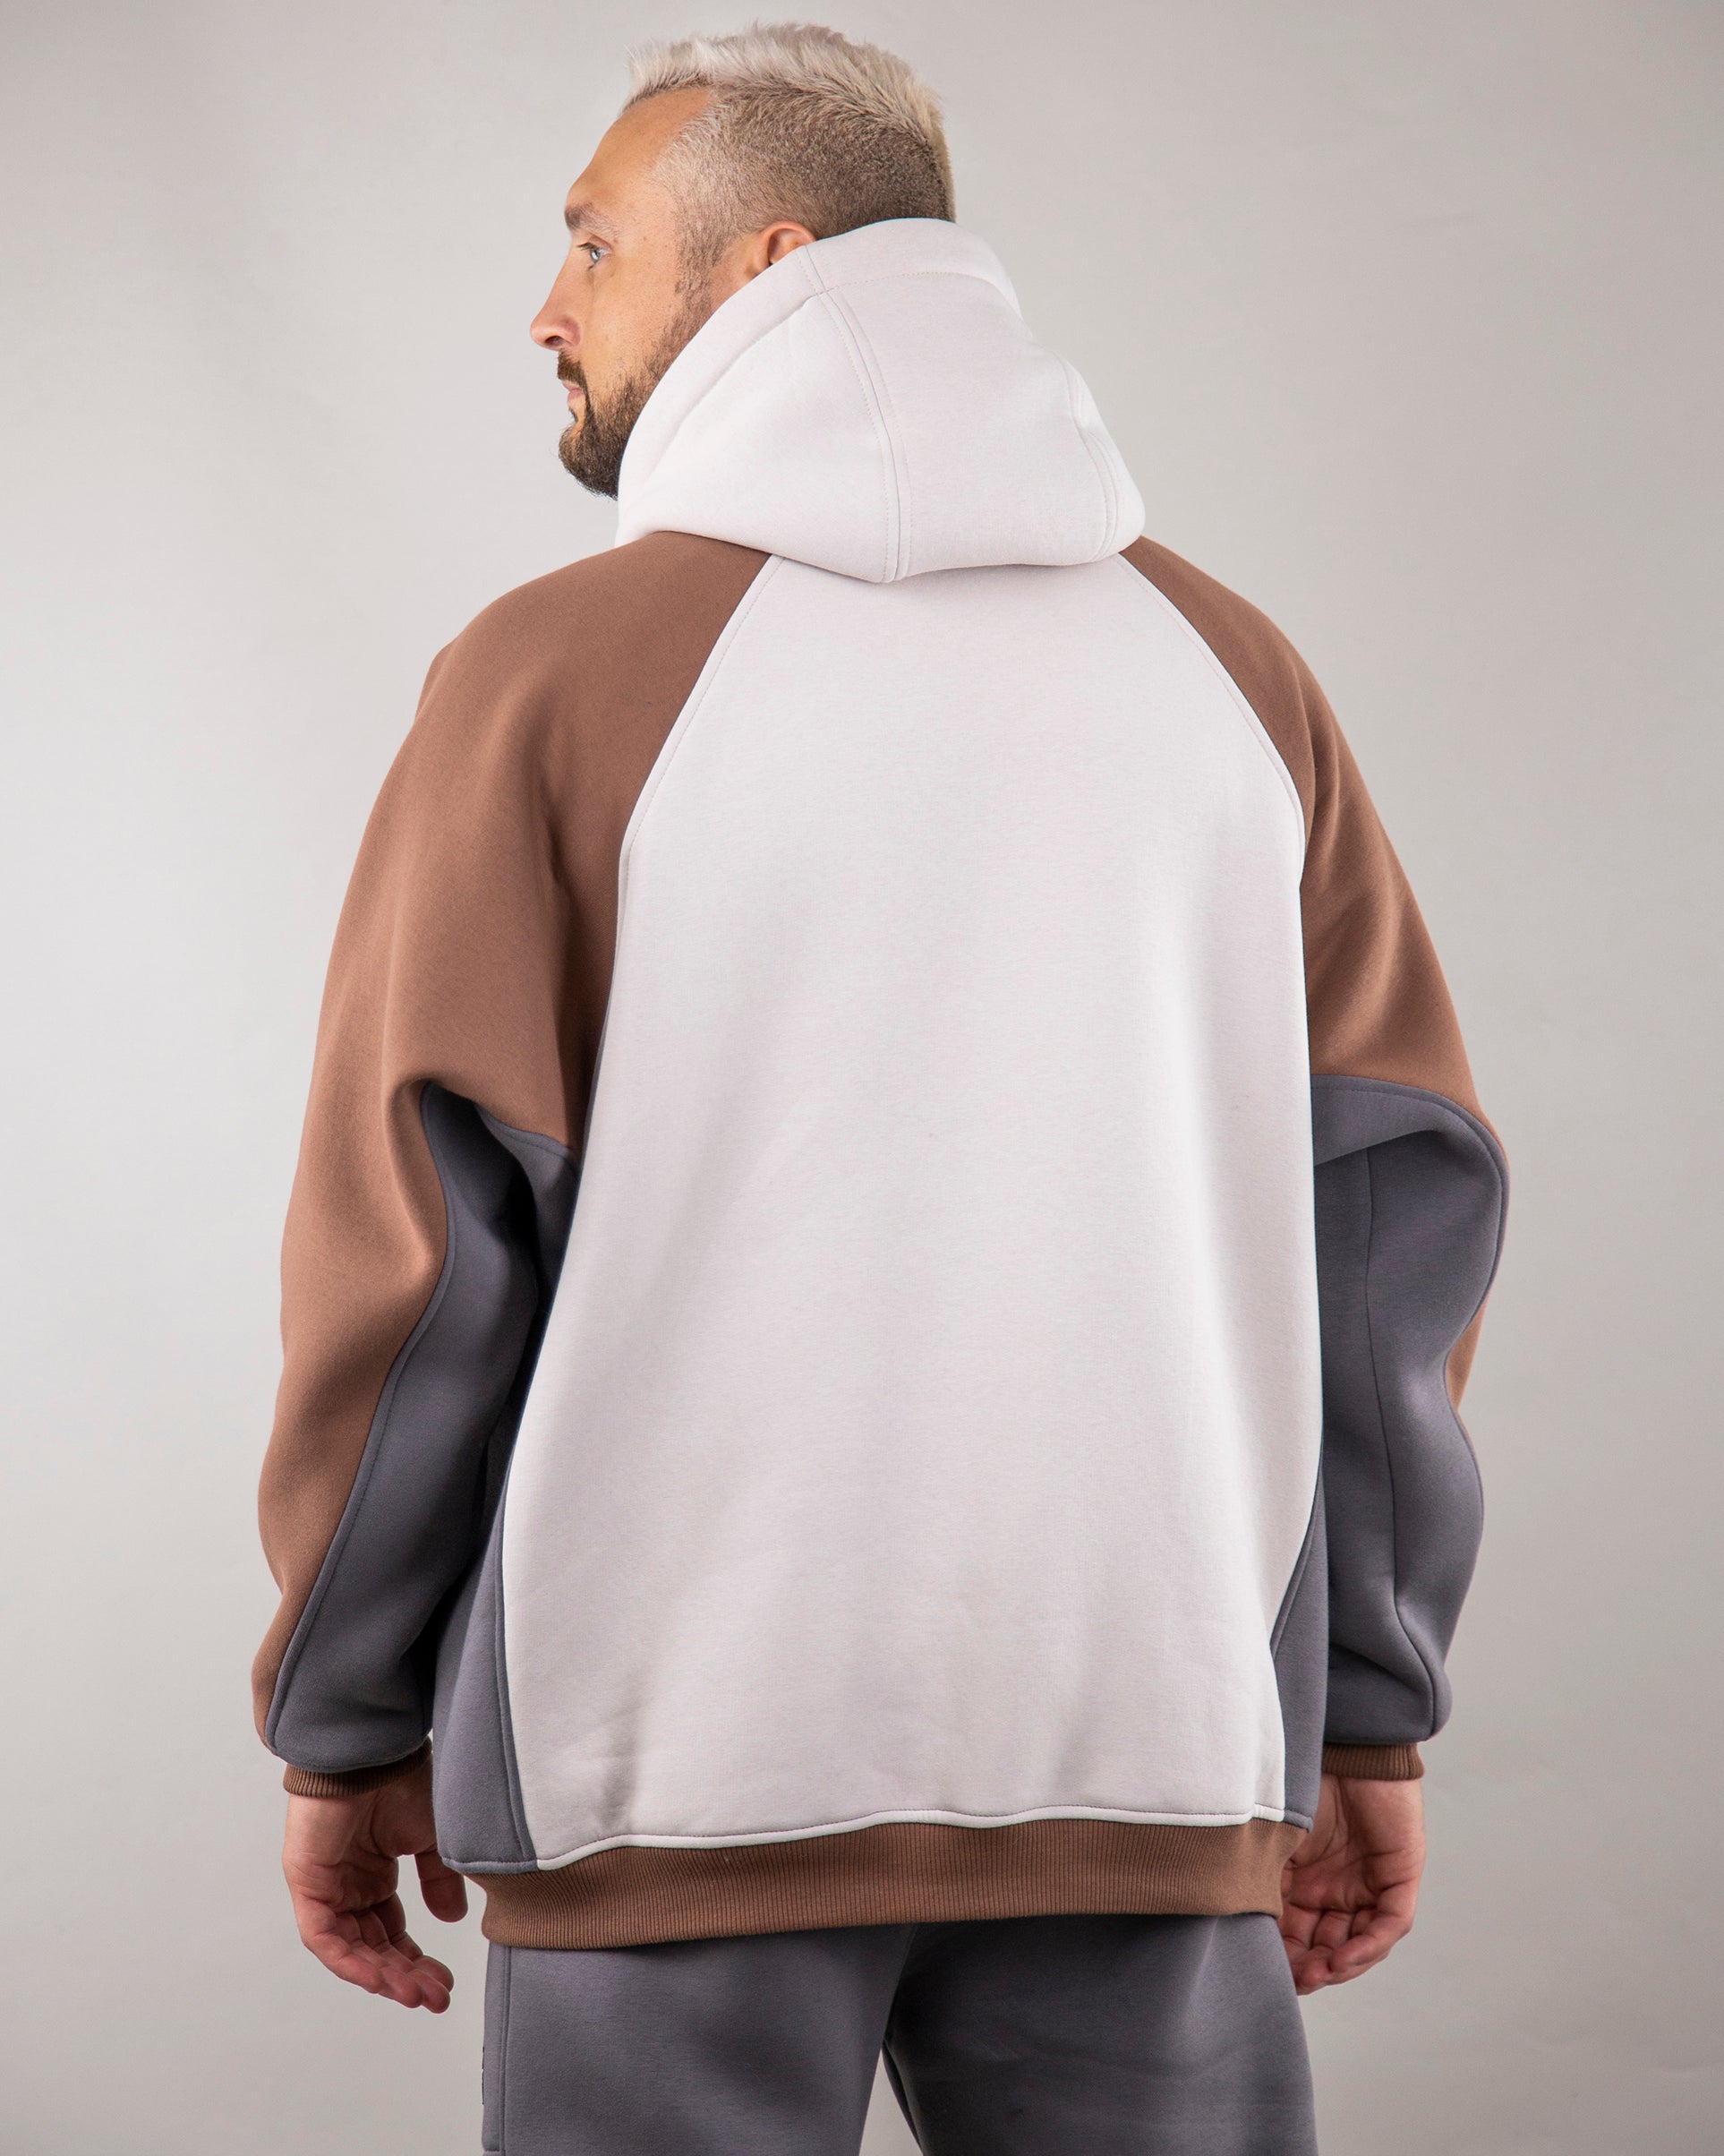 Cappuccino Vyshyvanka: Rich cappuccino-colored Hoodie. Man from the Back.